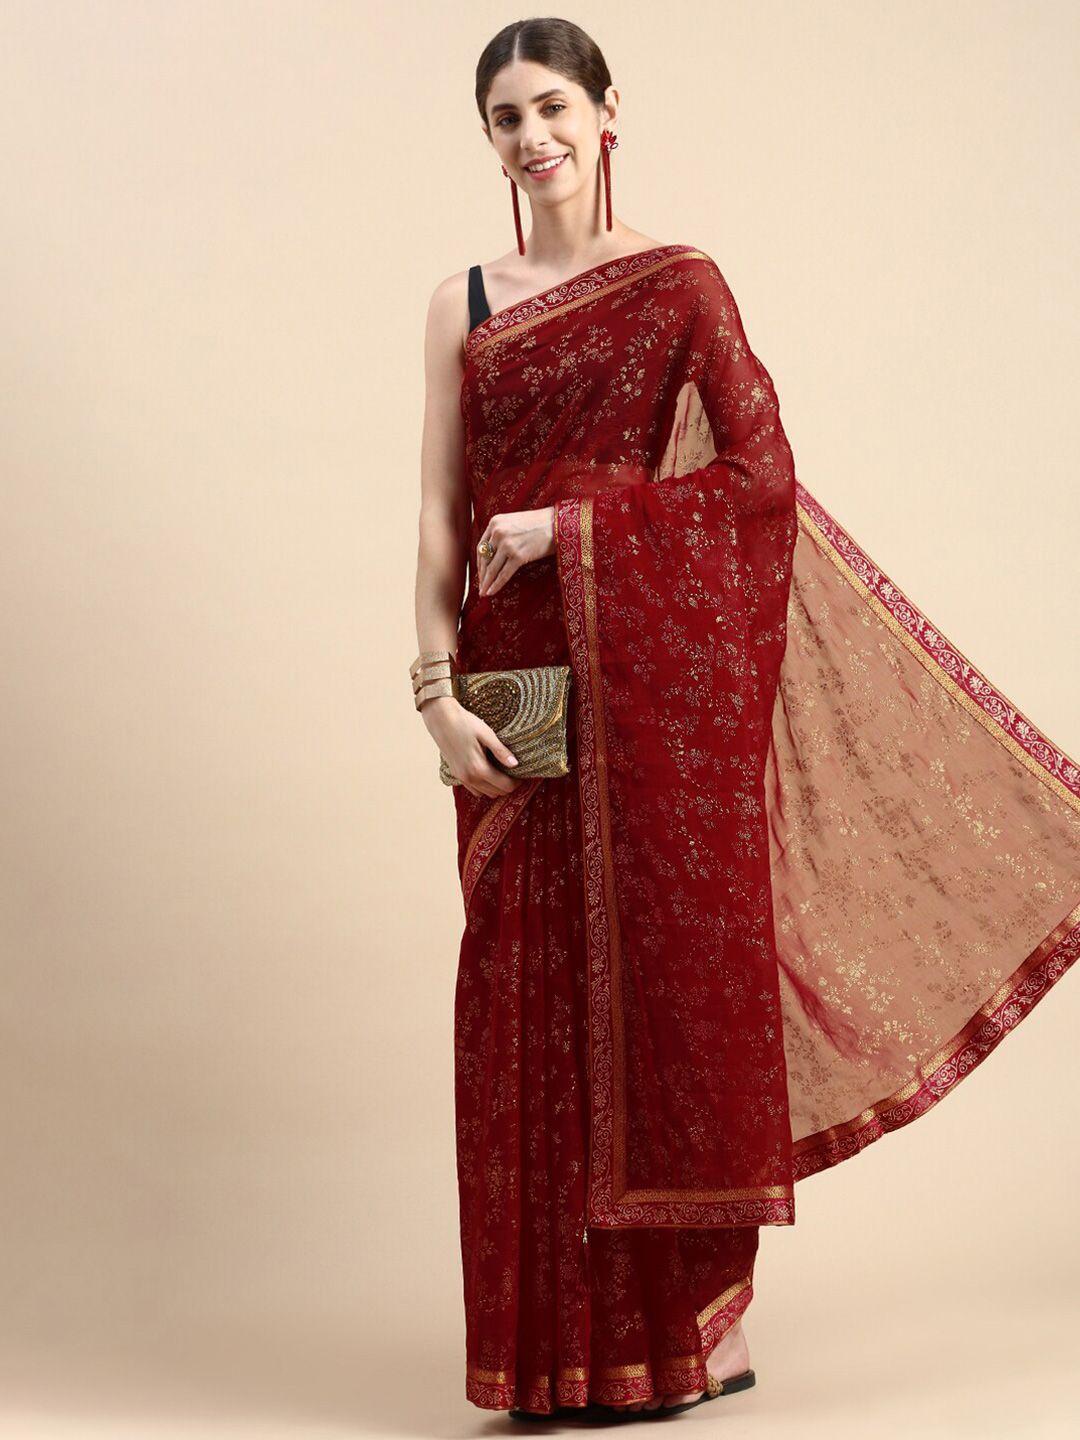 kalini floral embellished beads and stones saree